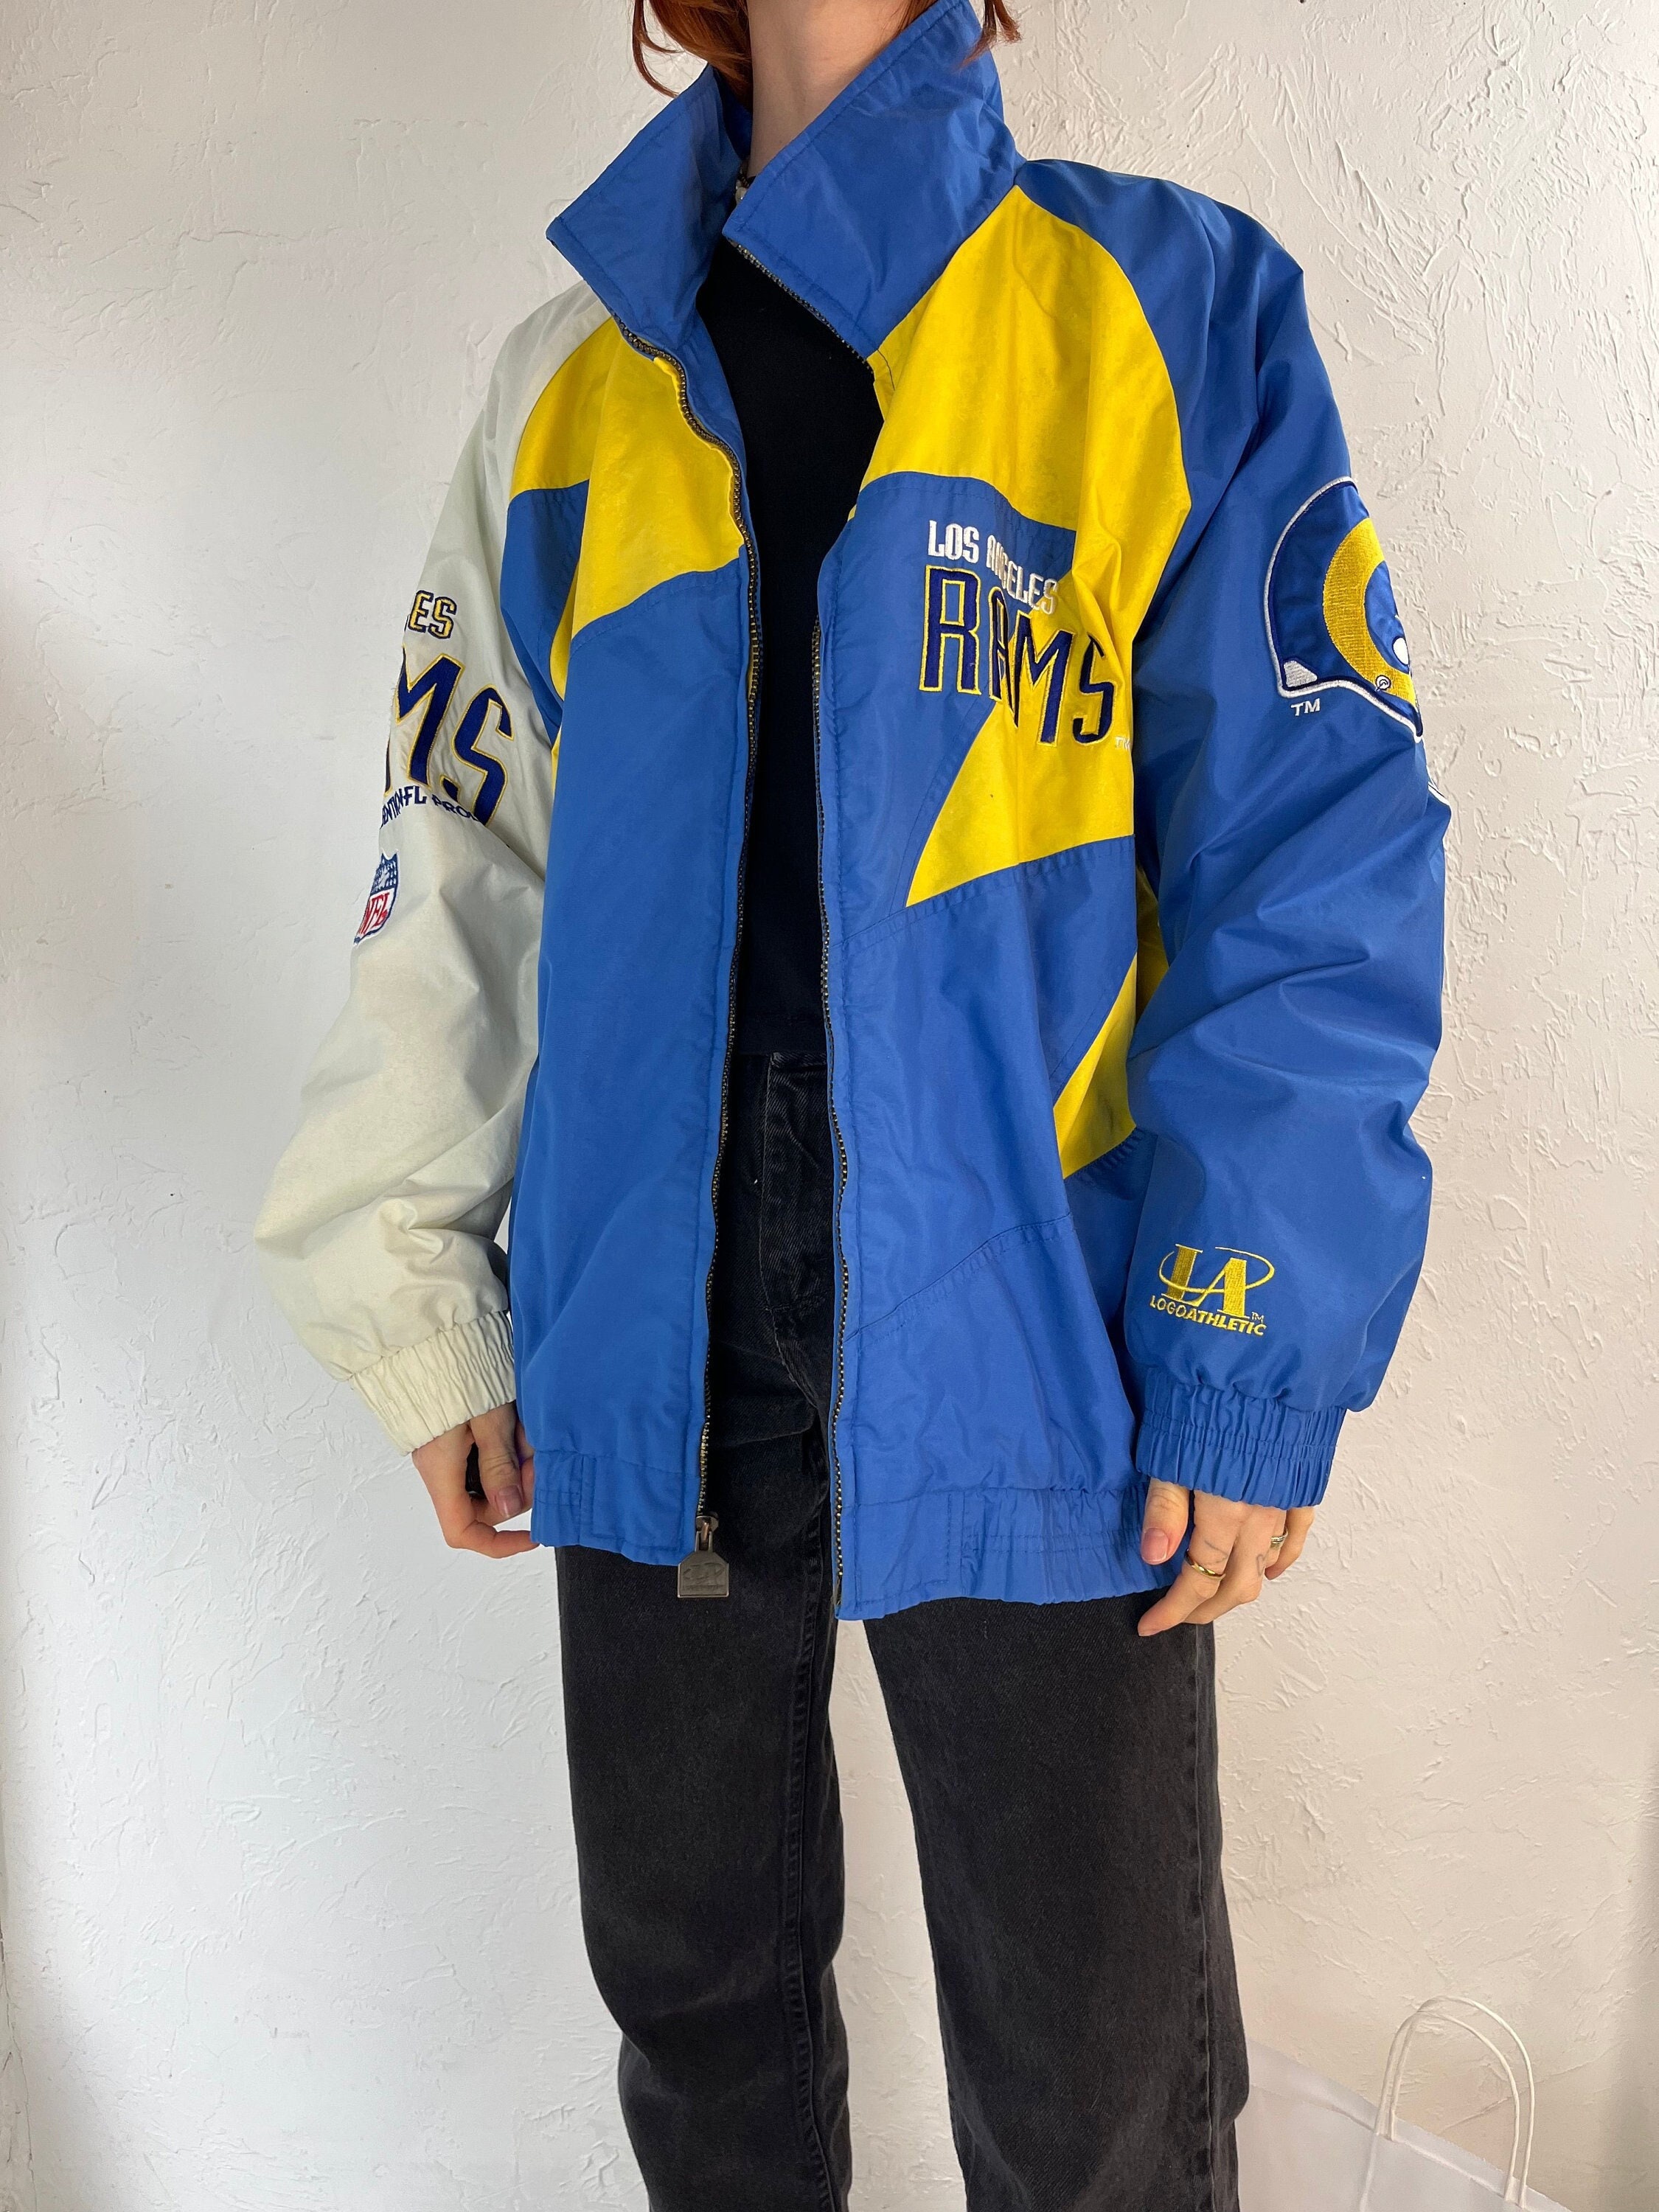 NFL RAMS Jacket Vintage Made in China 